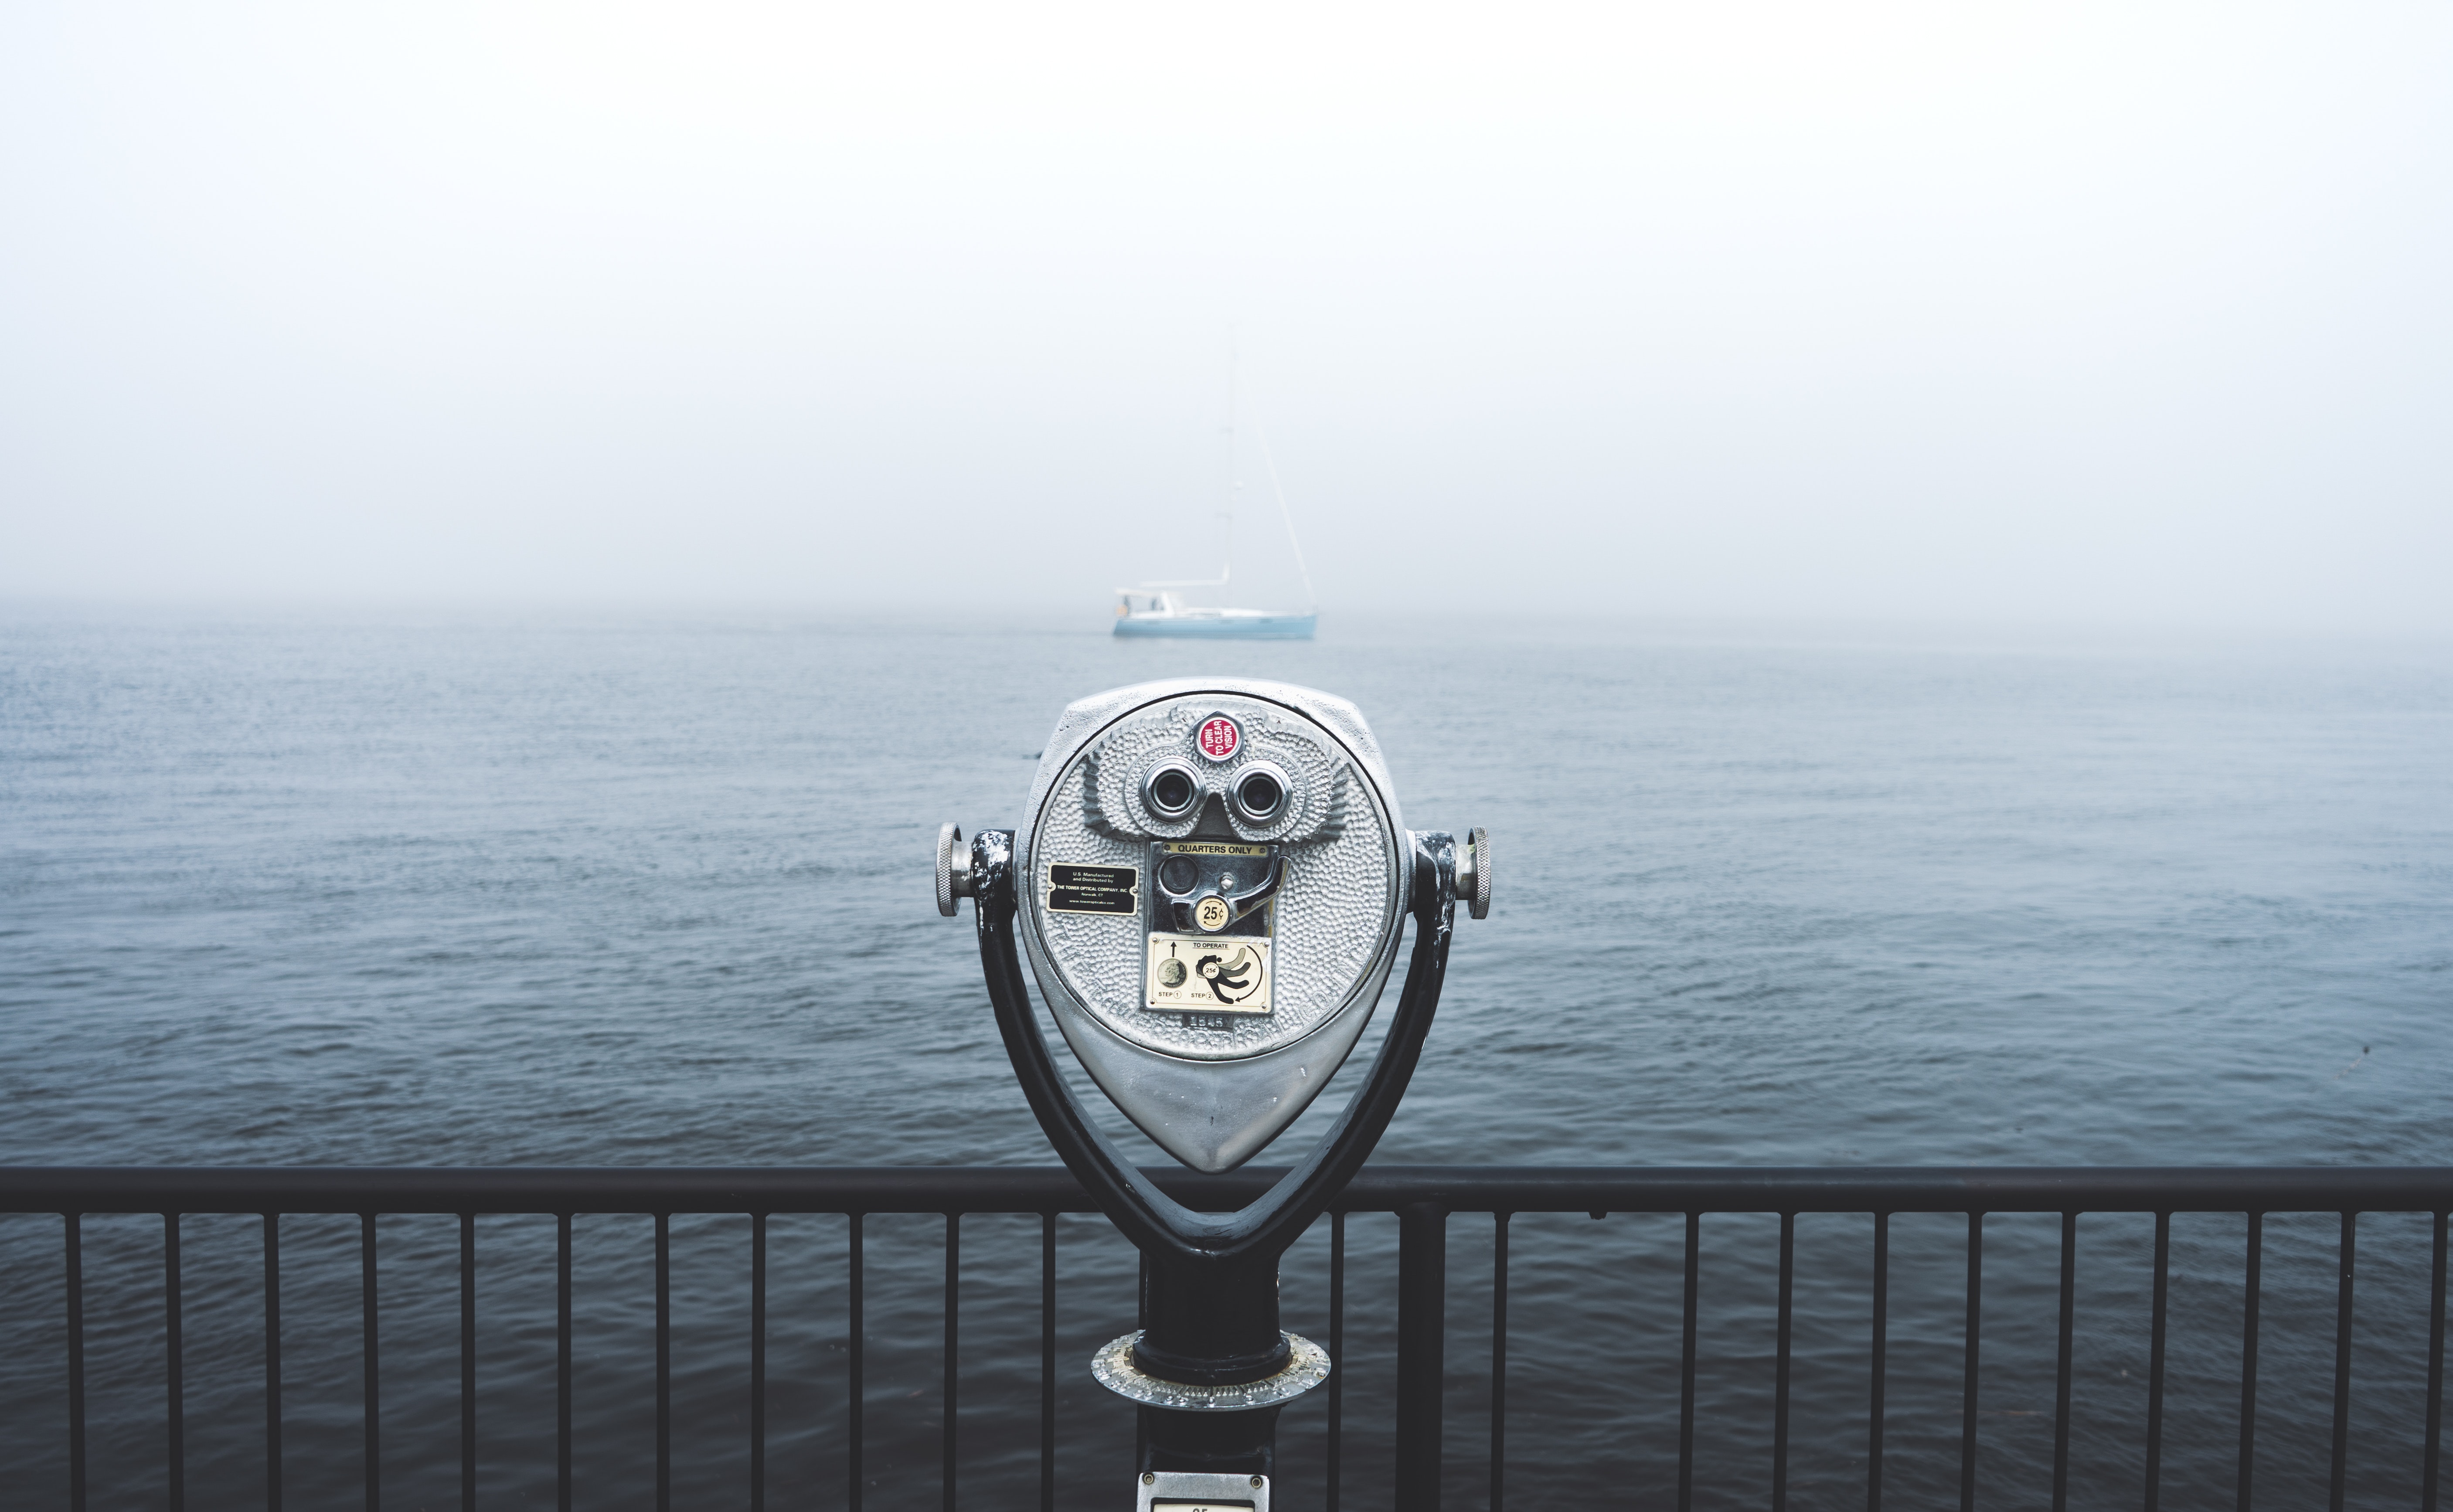 Coin operated binoculars looking over the ocean during foggy weather